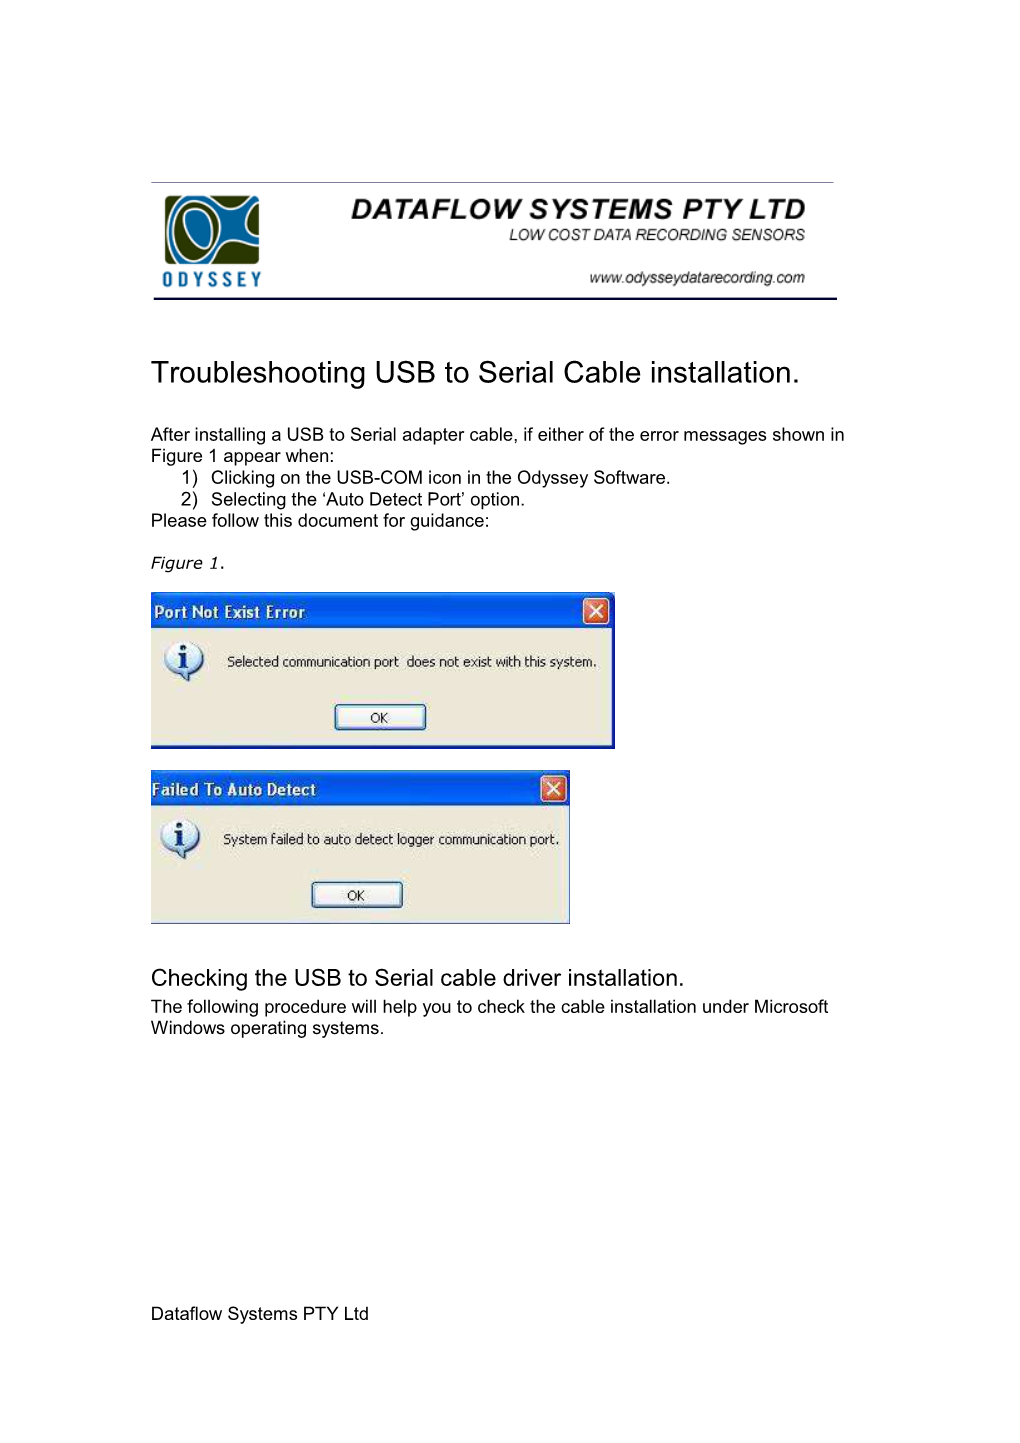 Troubleshooting USB to Serial Cable Installation